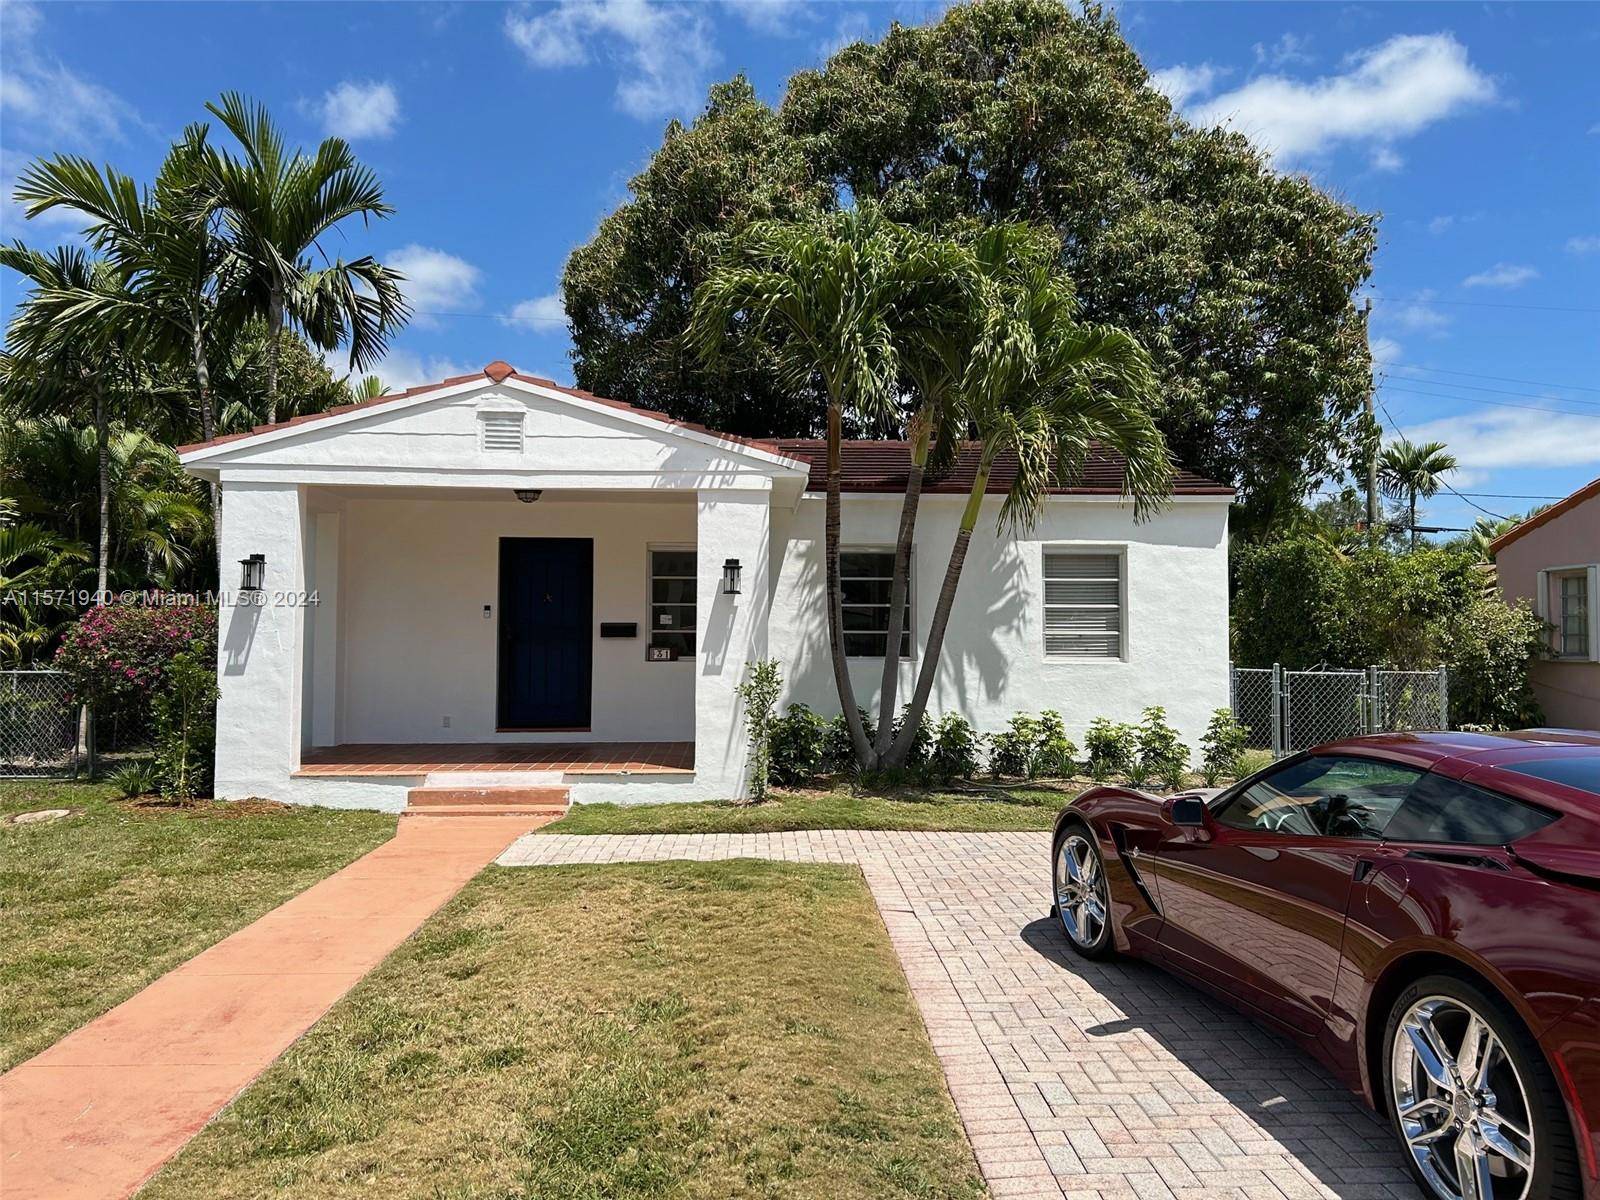 Great rental in Coral Gables.